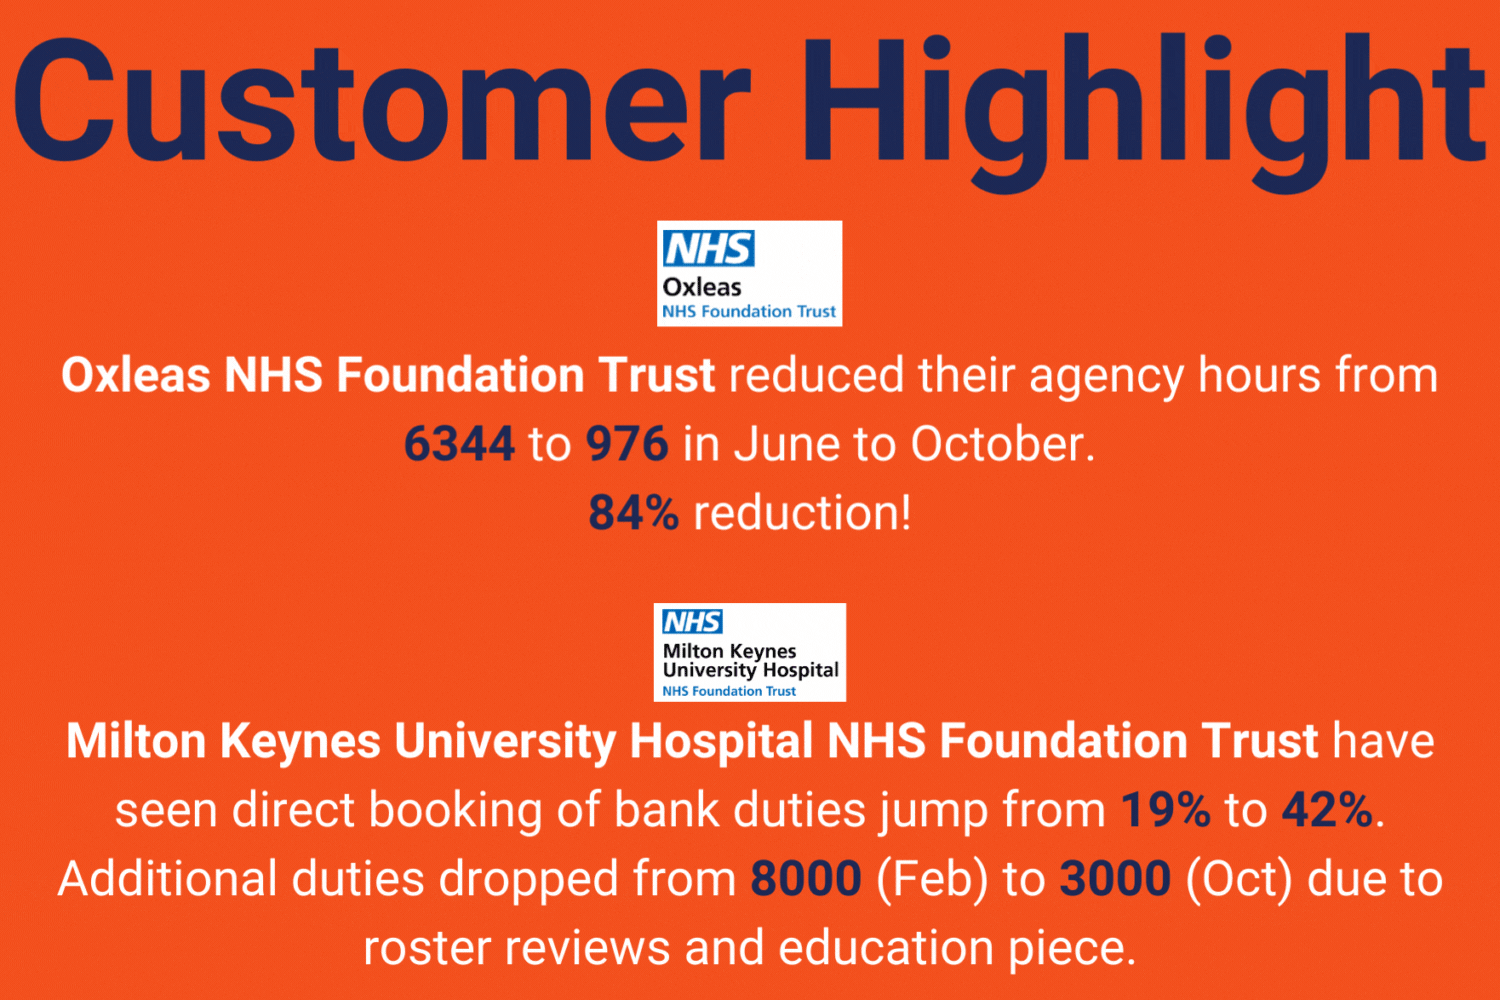 Customer Highlight Oxleas NHS Foundation Trust reduced their agency hours from 6344 to 976 in June to October. 84% reduction! Milton Keynes University Hospital NHS Foundation Trust have seen direct booking of bank duties jump from 19% to 42%. Additional duties dropped from 8000 (Feb) to 3000 (Oct) due to roster reviews and education piece.